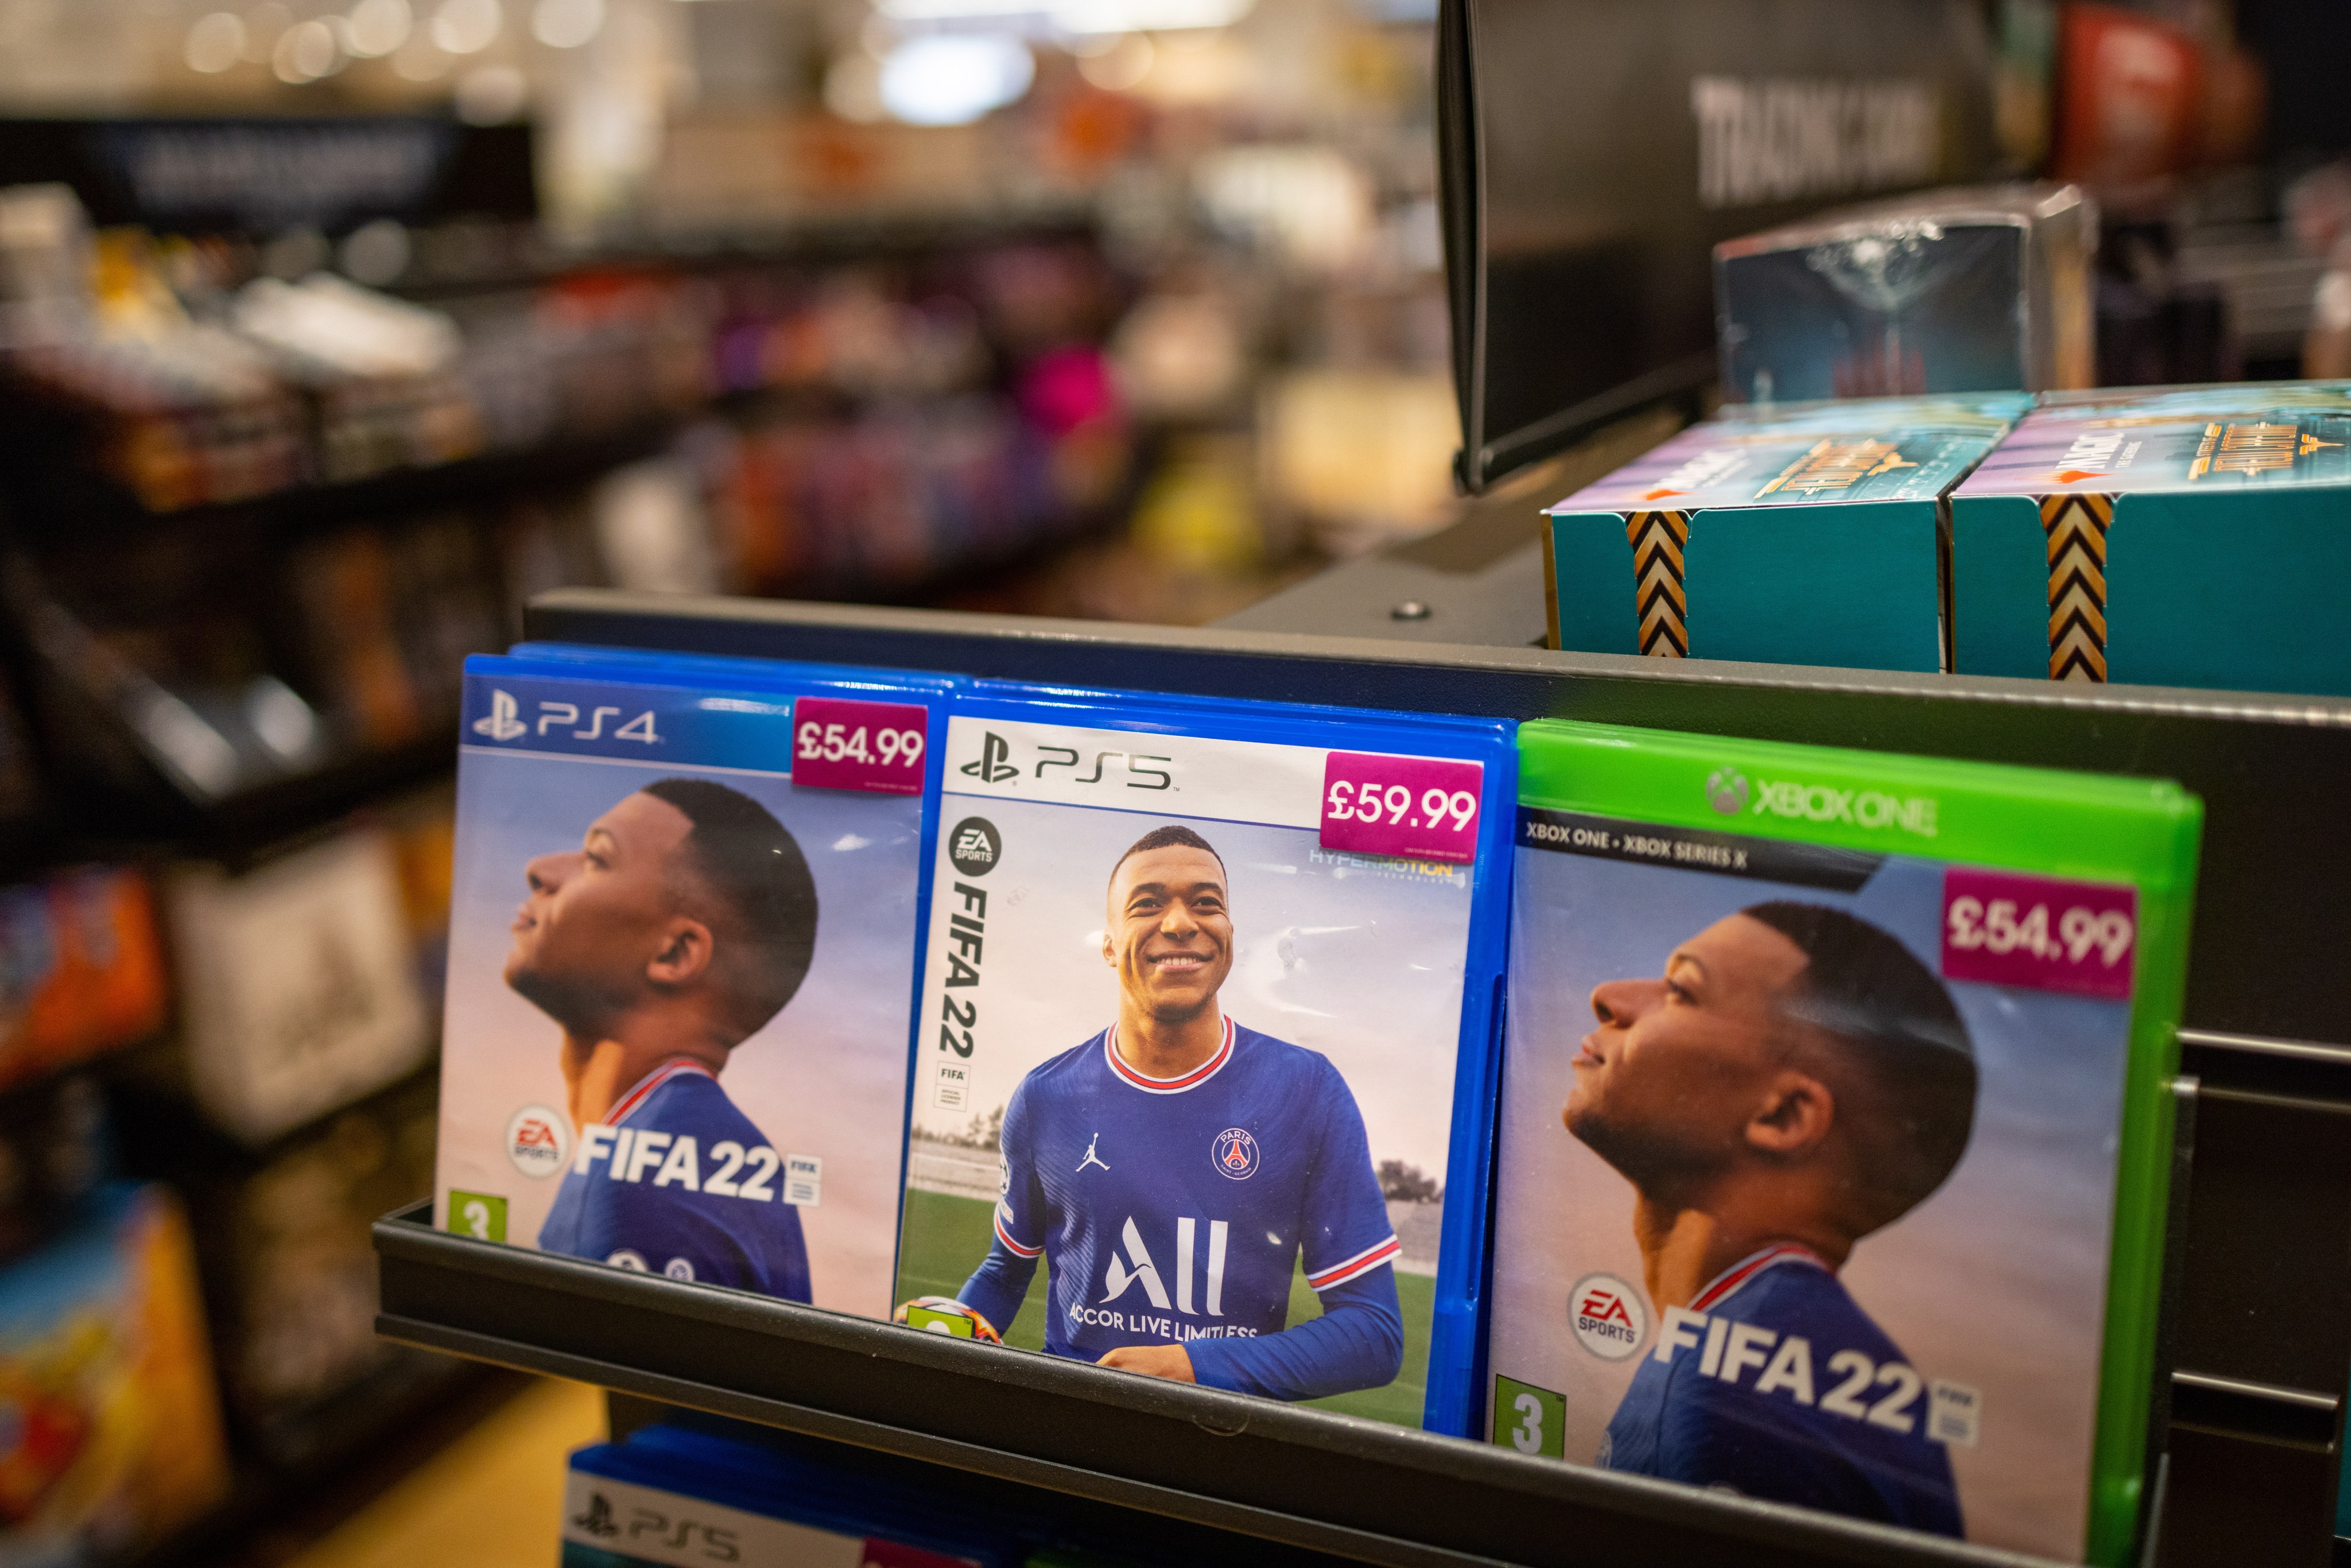 France forward Kylian Mbappe features on the cover of FIFA 22, which was made by EA Sports. Photo: EPA-EFE